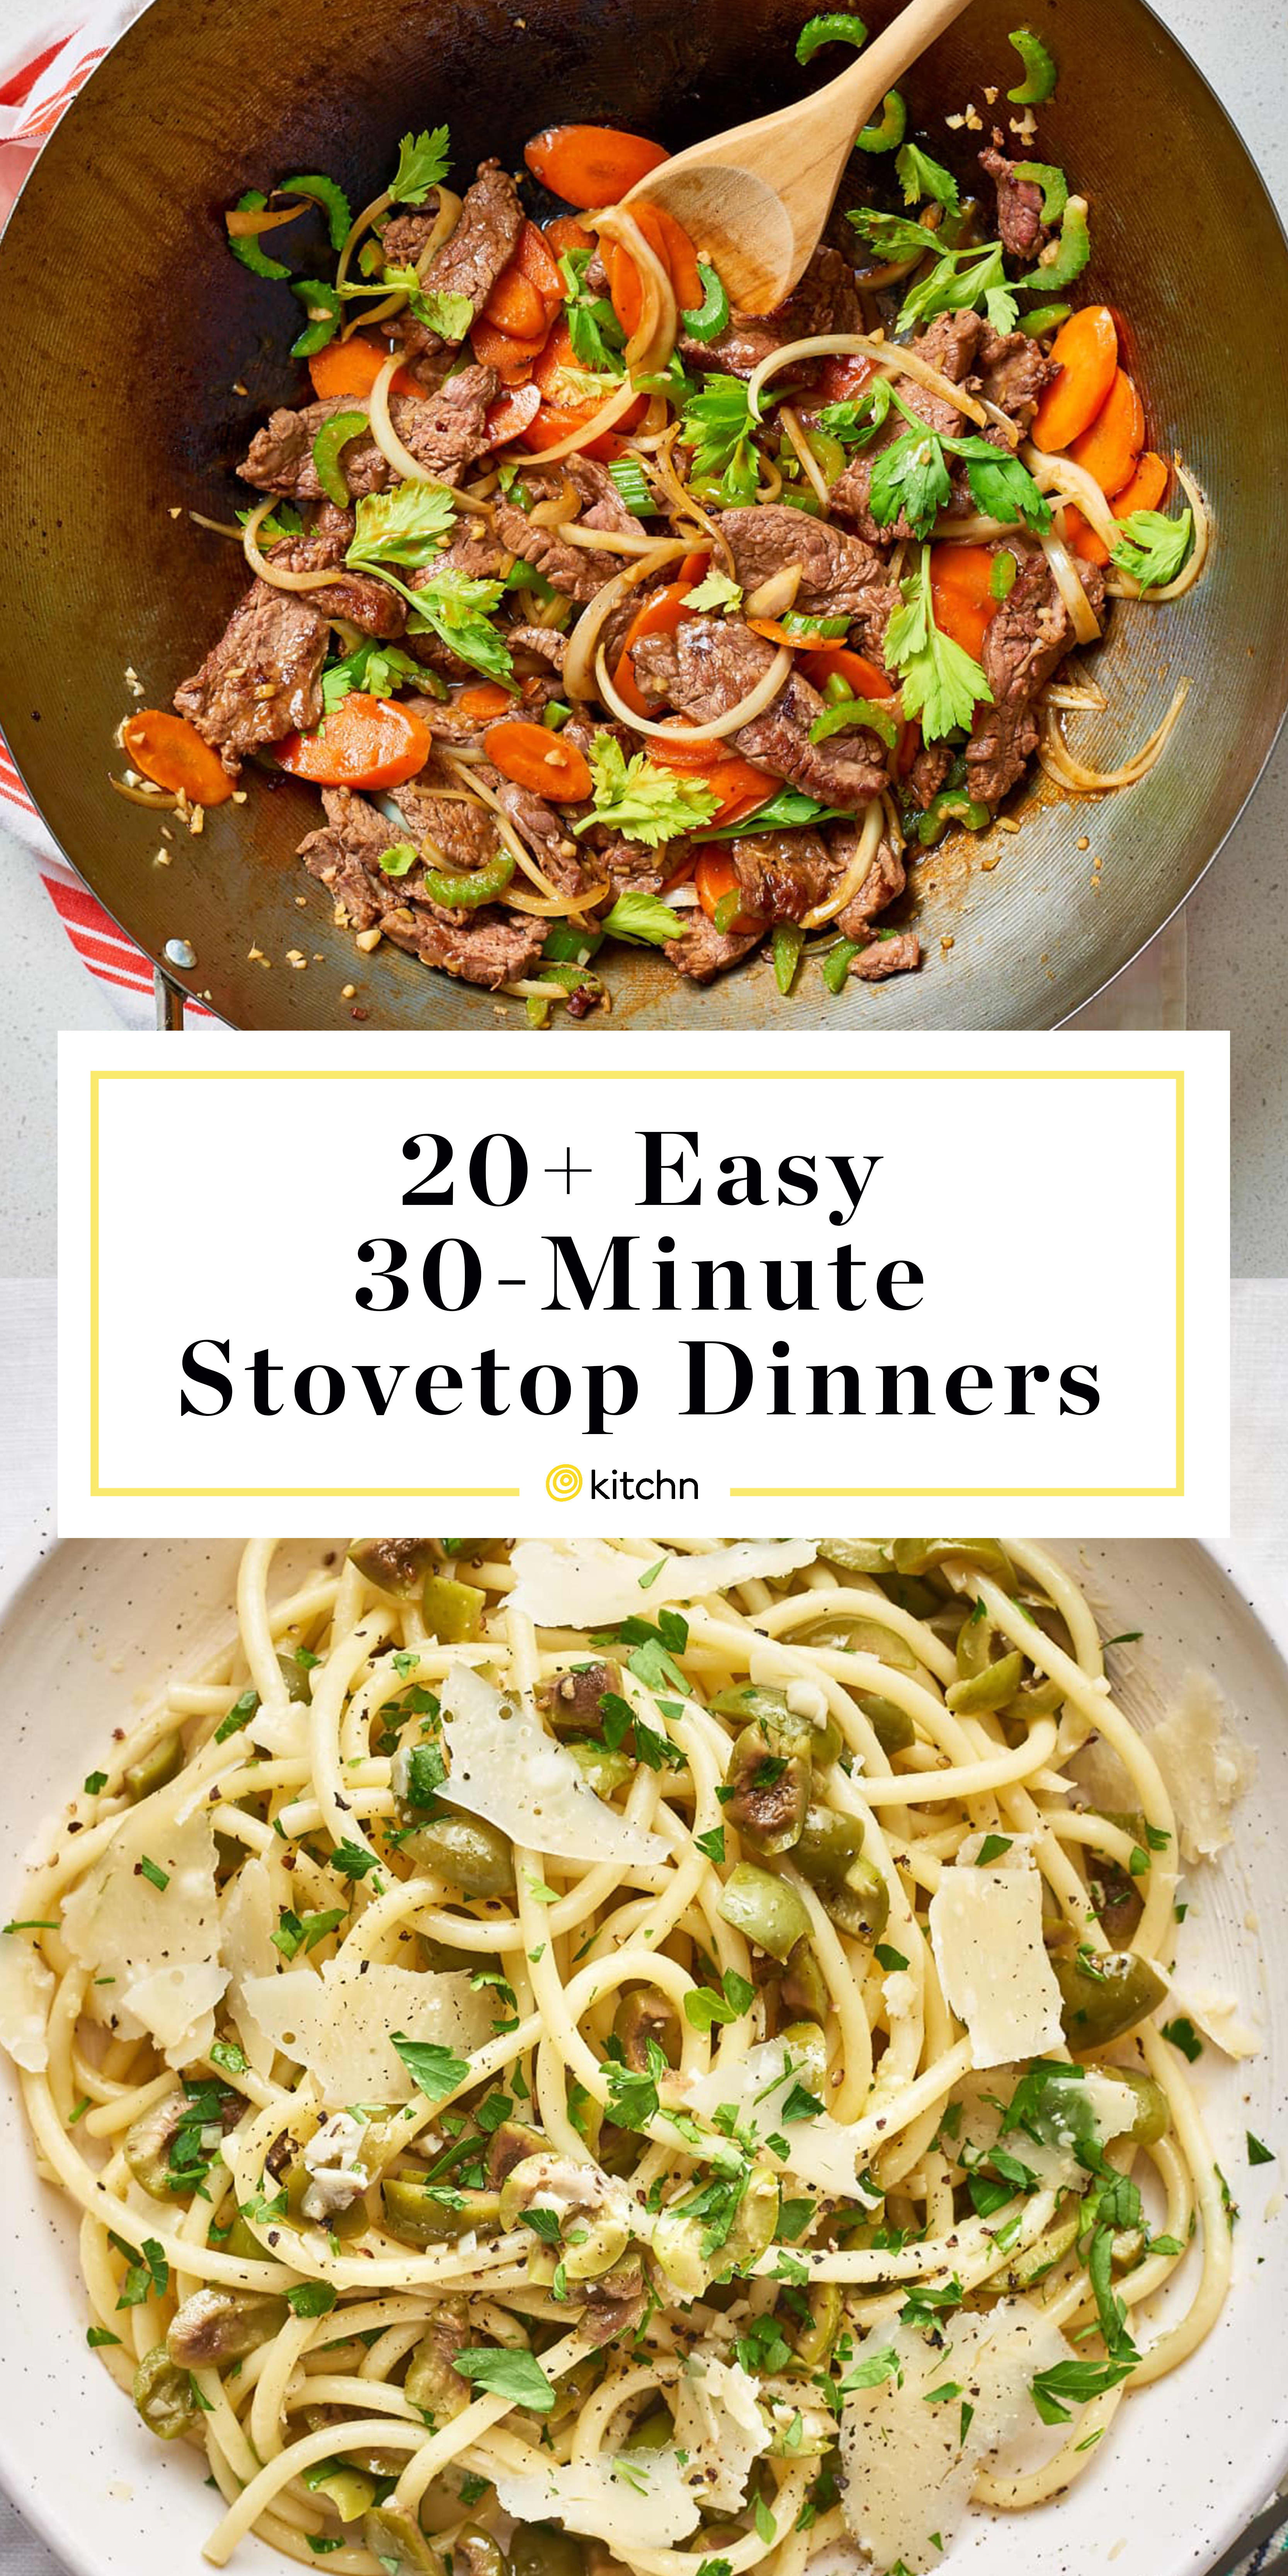 30-Minute Stovetop Recipes